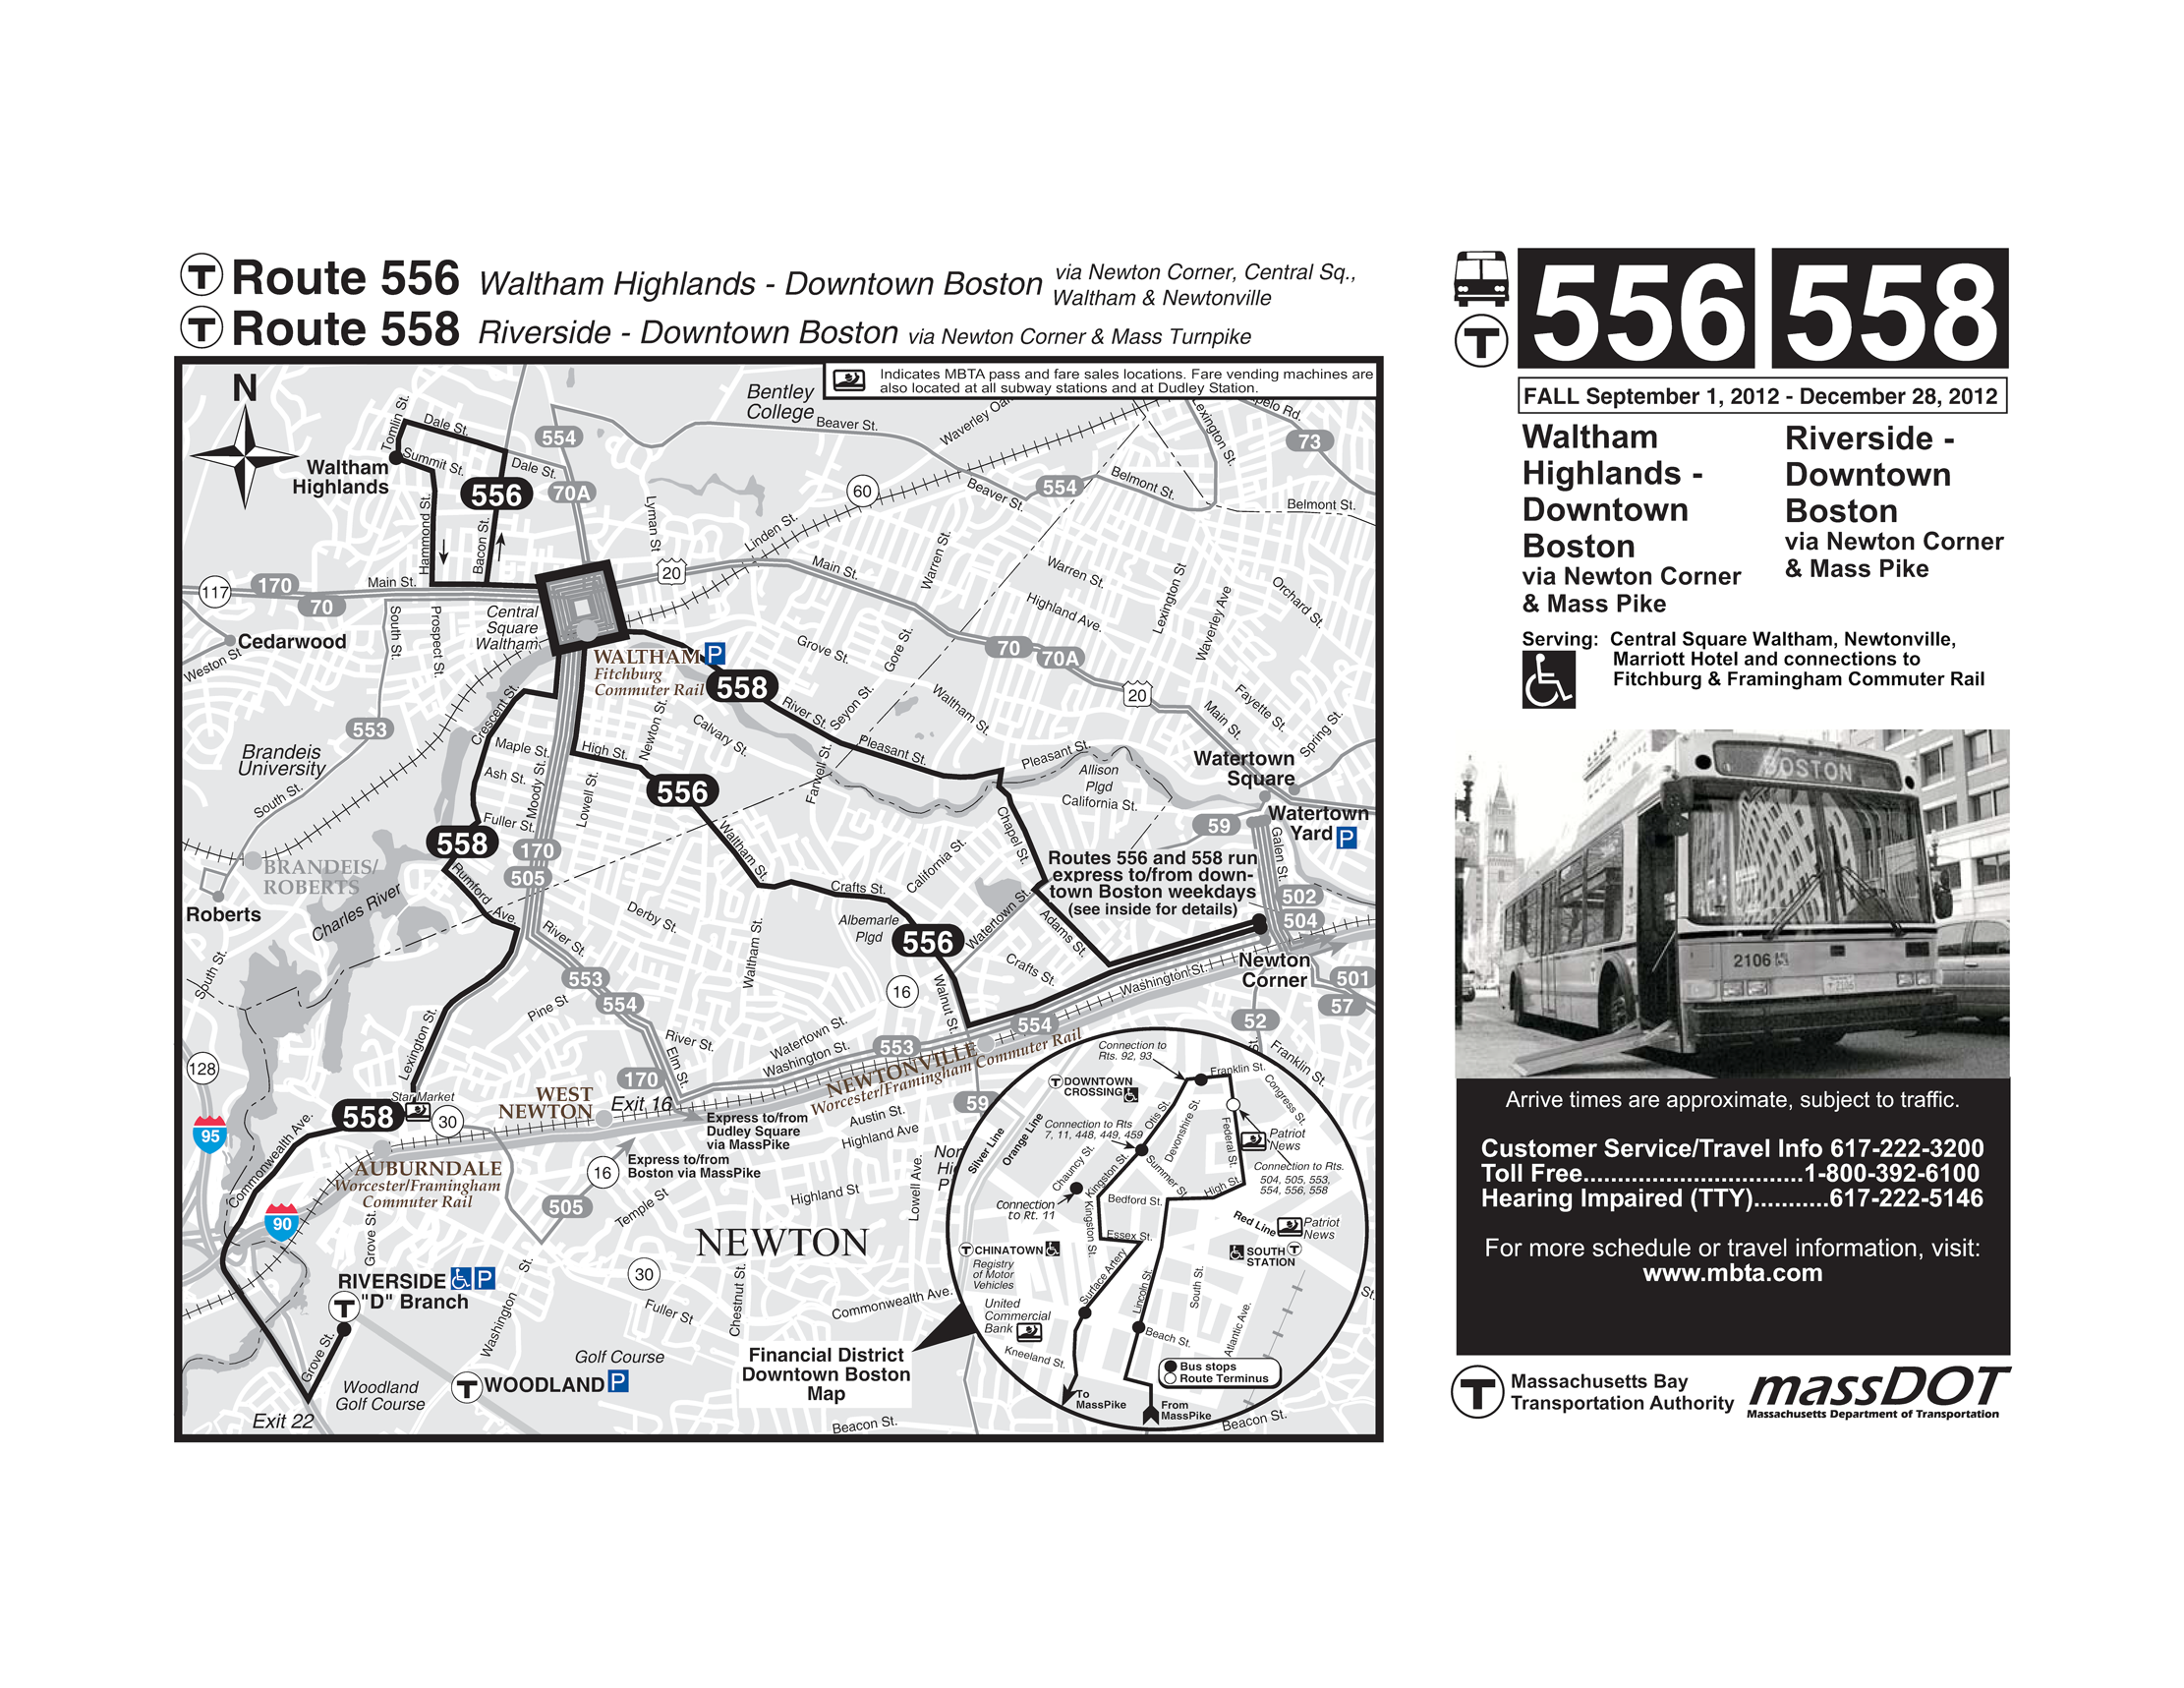 This page is the MBTA map for bus Route 558, between Riverside and Downtown Boston. 